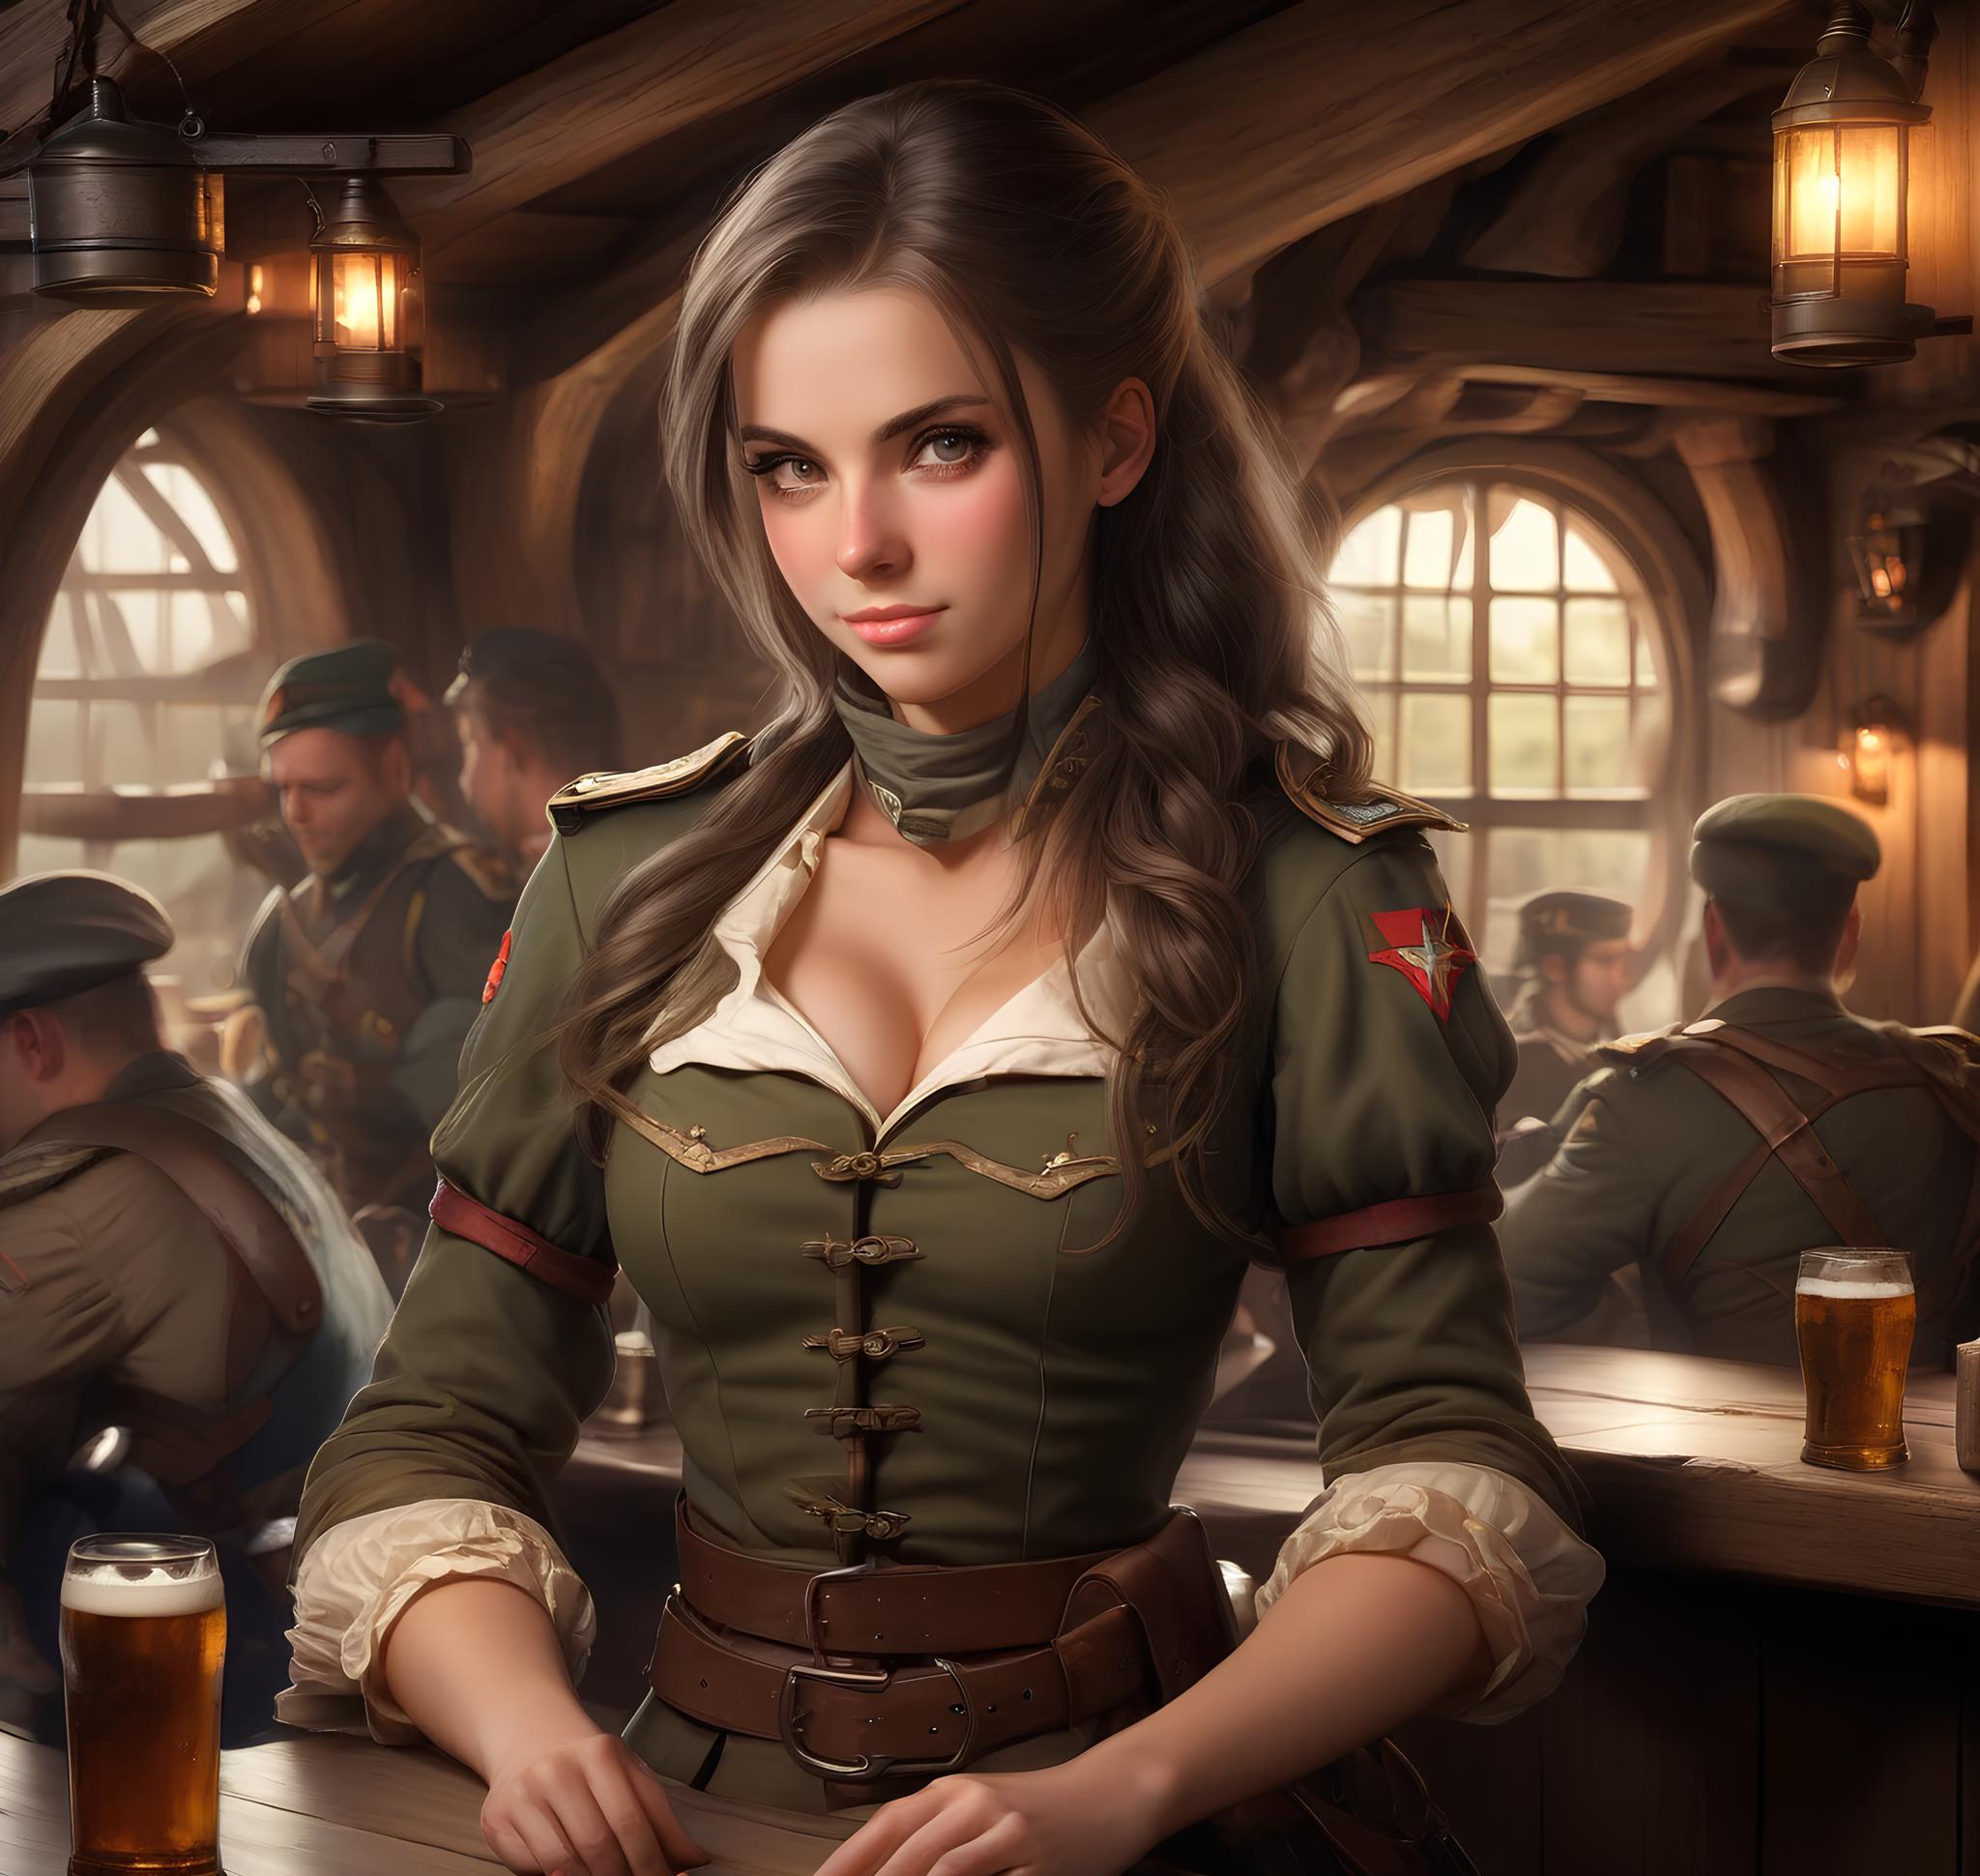 Free photo A girl soldier in a tavern